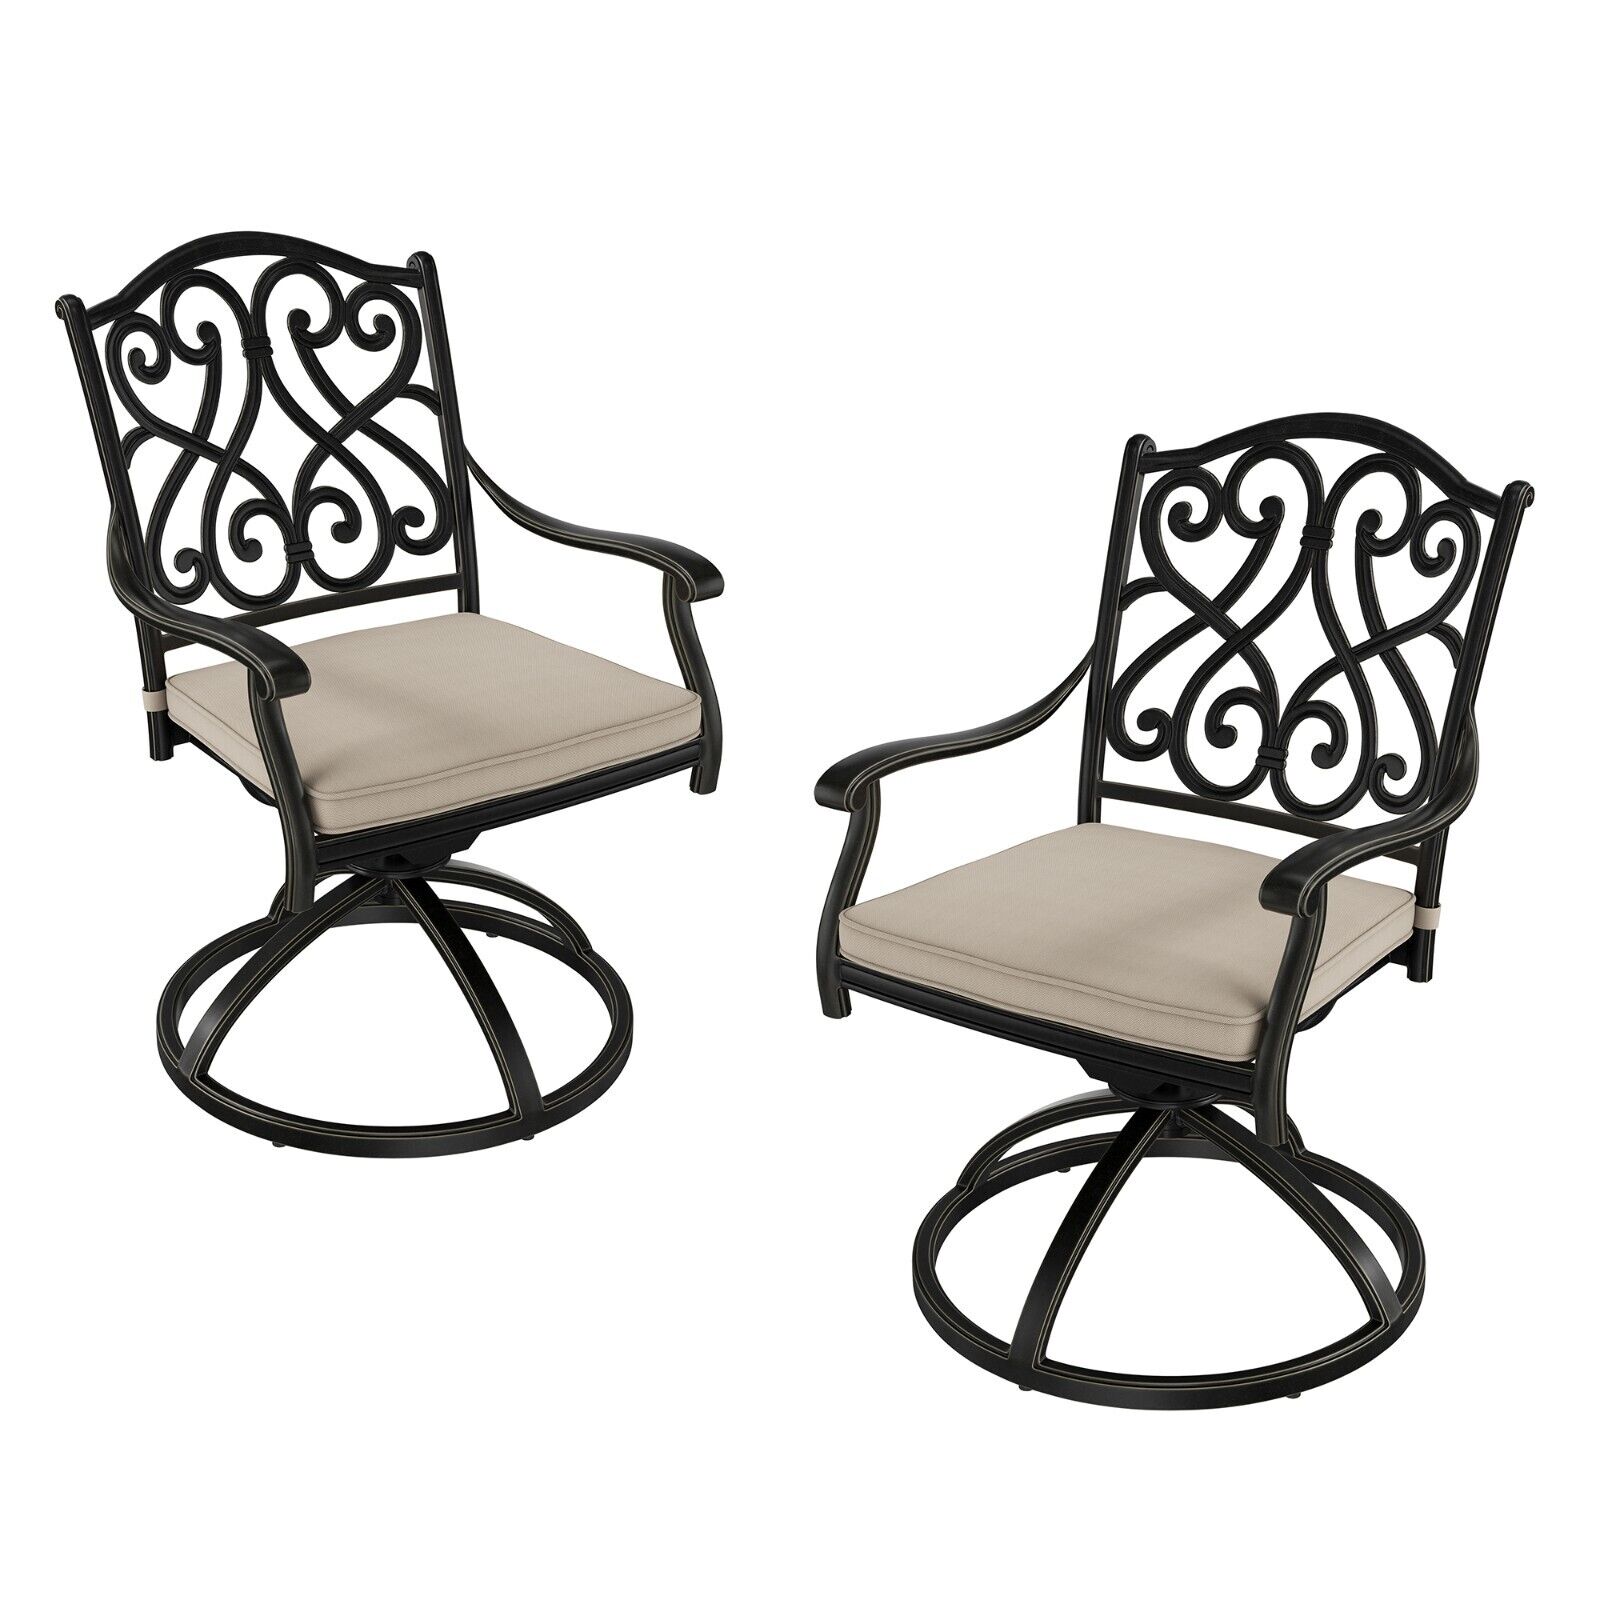 Clihome Set of 2 Cast Aluminum Patio Vintage Carved Swivel Chairs with Cushions